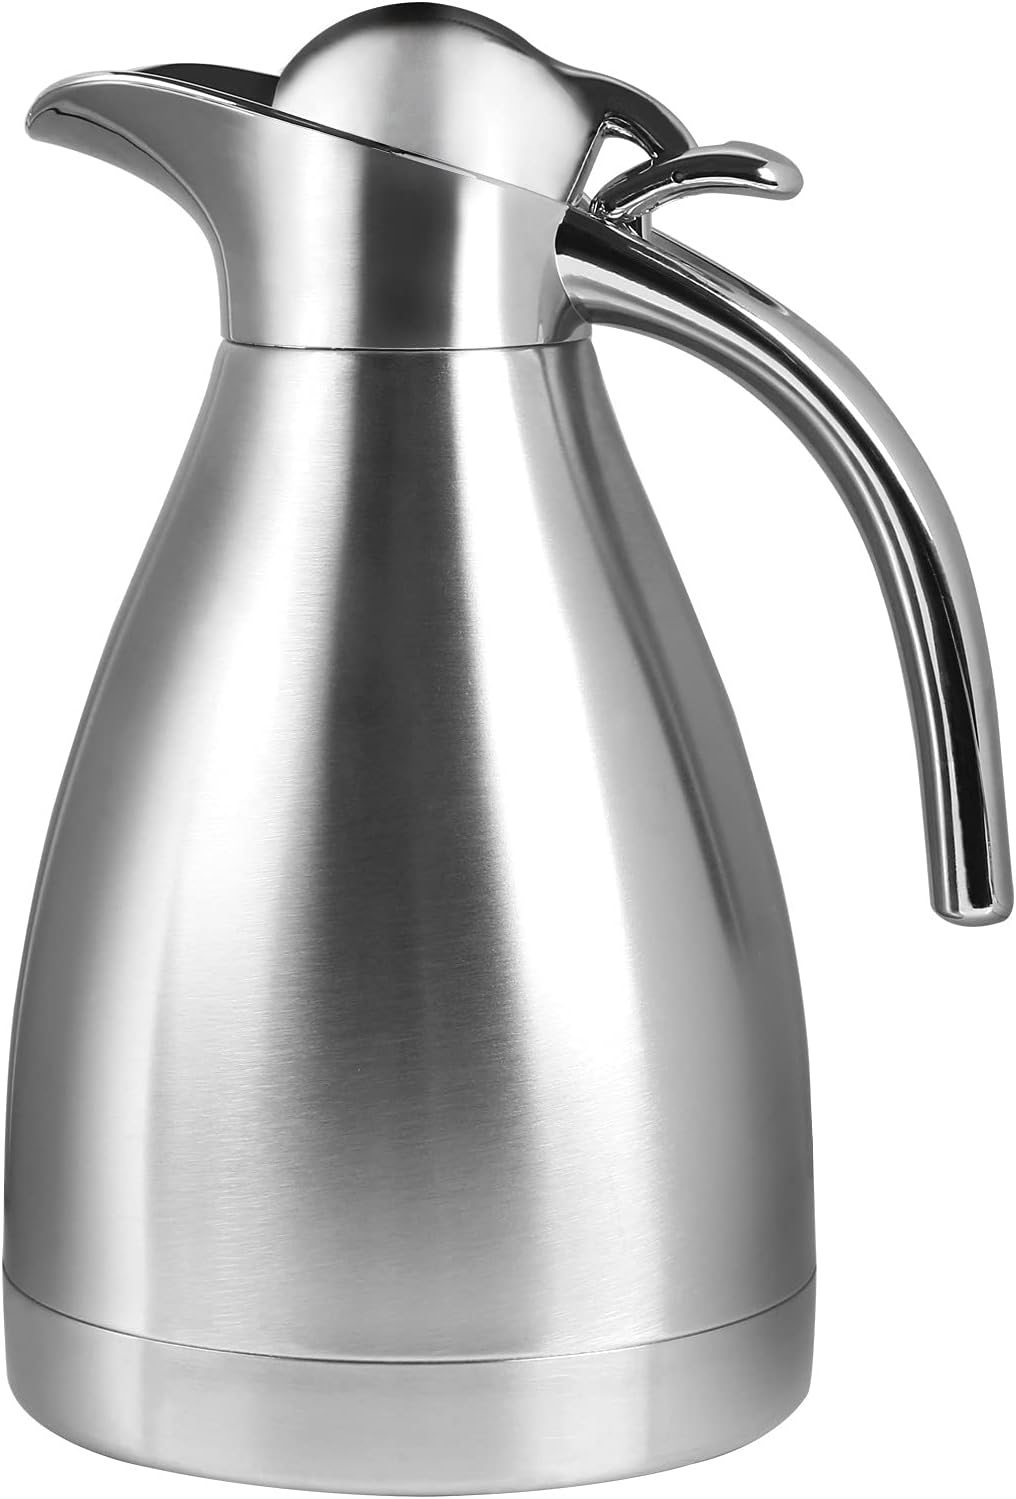 Generic Yoodelife 34 oz Food-grade Stainless Steel Thermal Carafe/Double Walled Vacuum Insulated Pot with Press Button Top, 12+ Hrs Hea